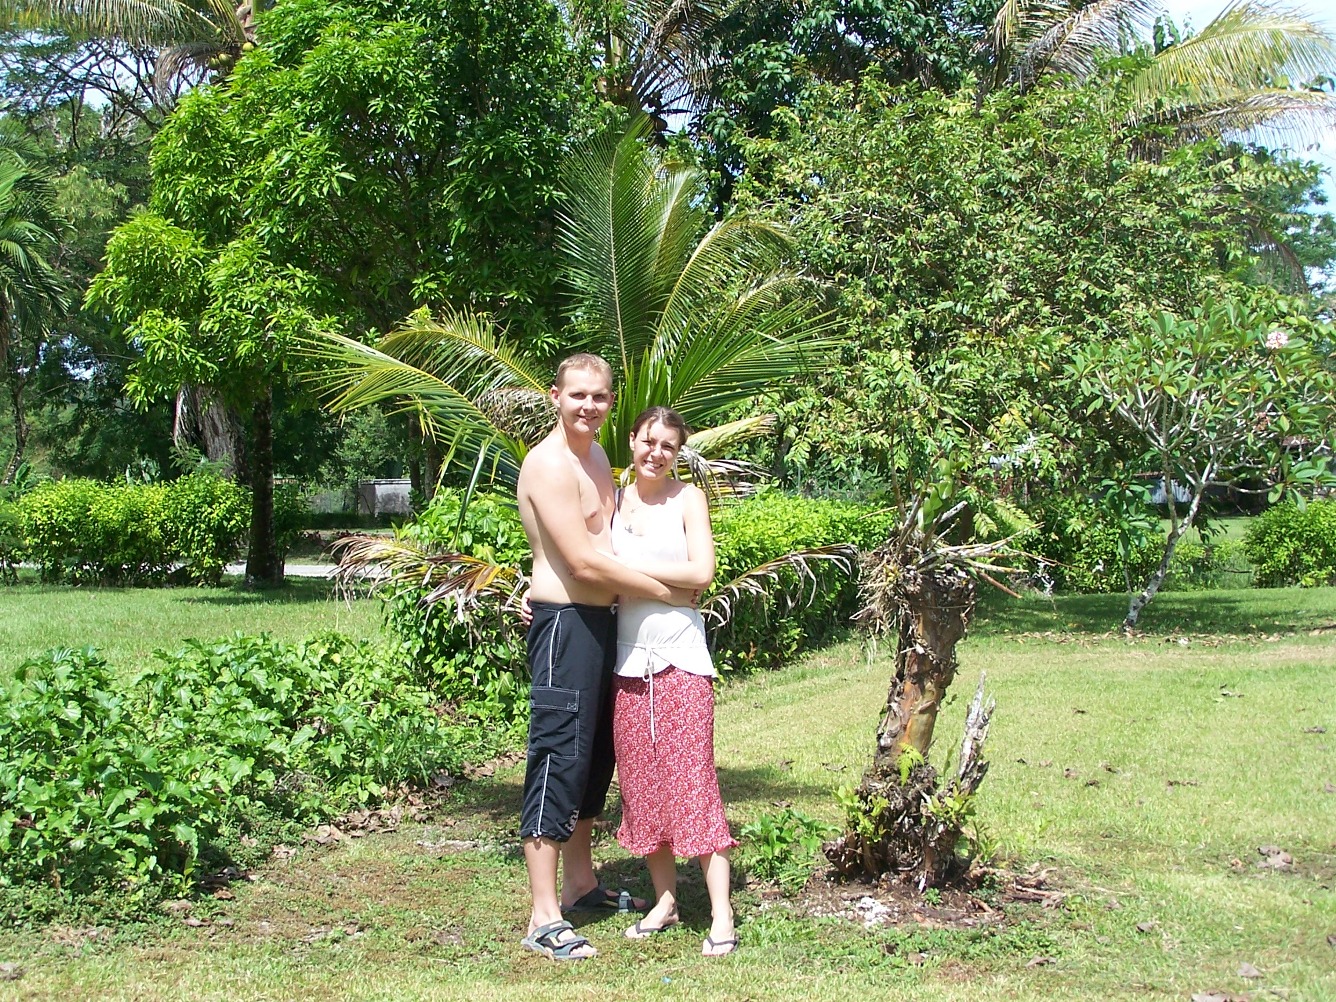 My wife and I at our planted Palm Tree